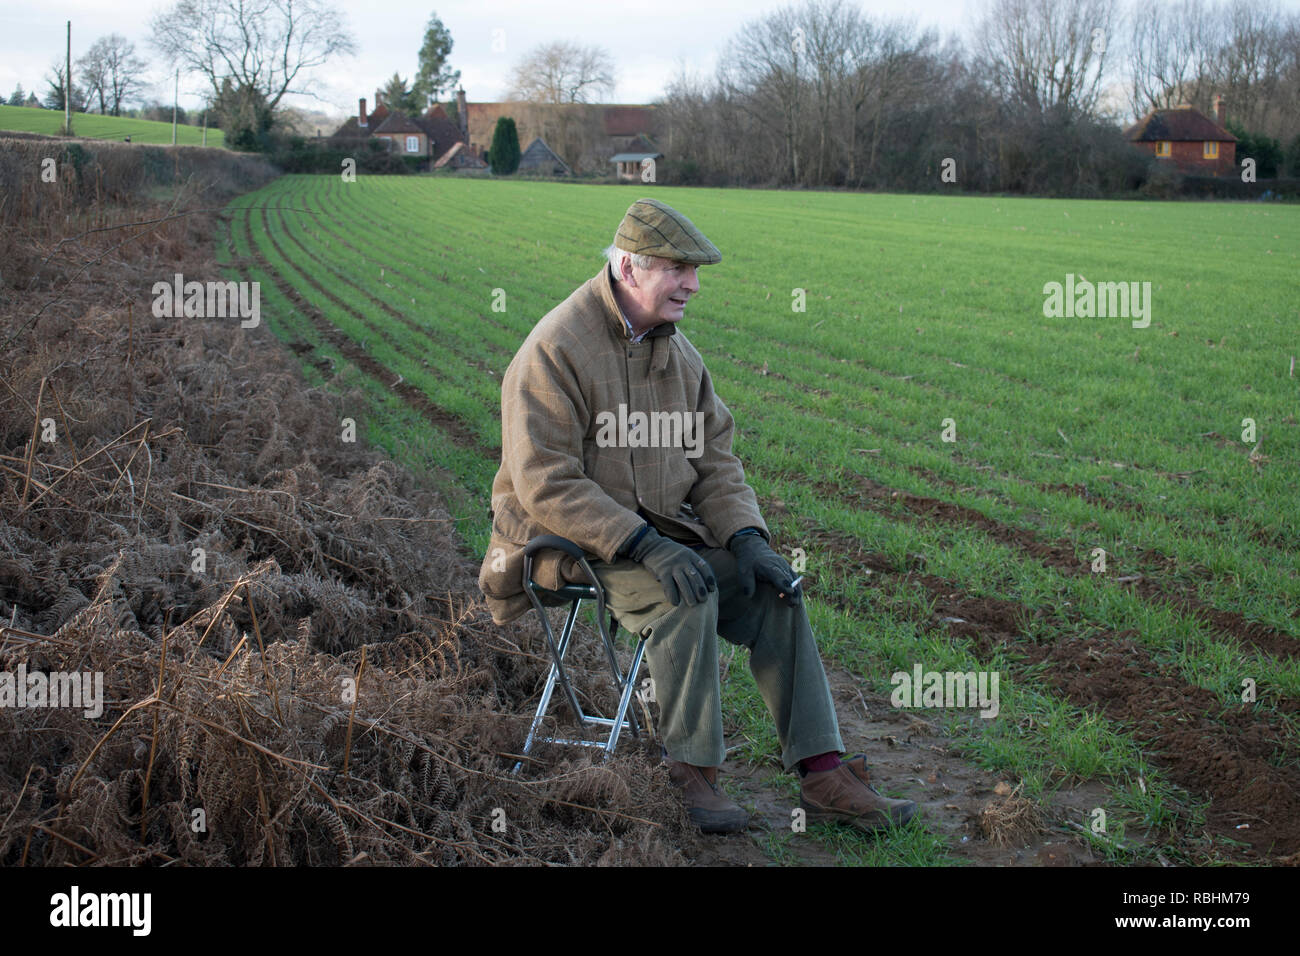 Shooting stick, older elderly man sitting in the countryside  Field Sports enthusiast. Midhurst West Sussex 2019. 2010s HOMER SYKES Stock Photo